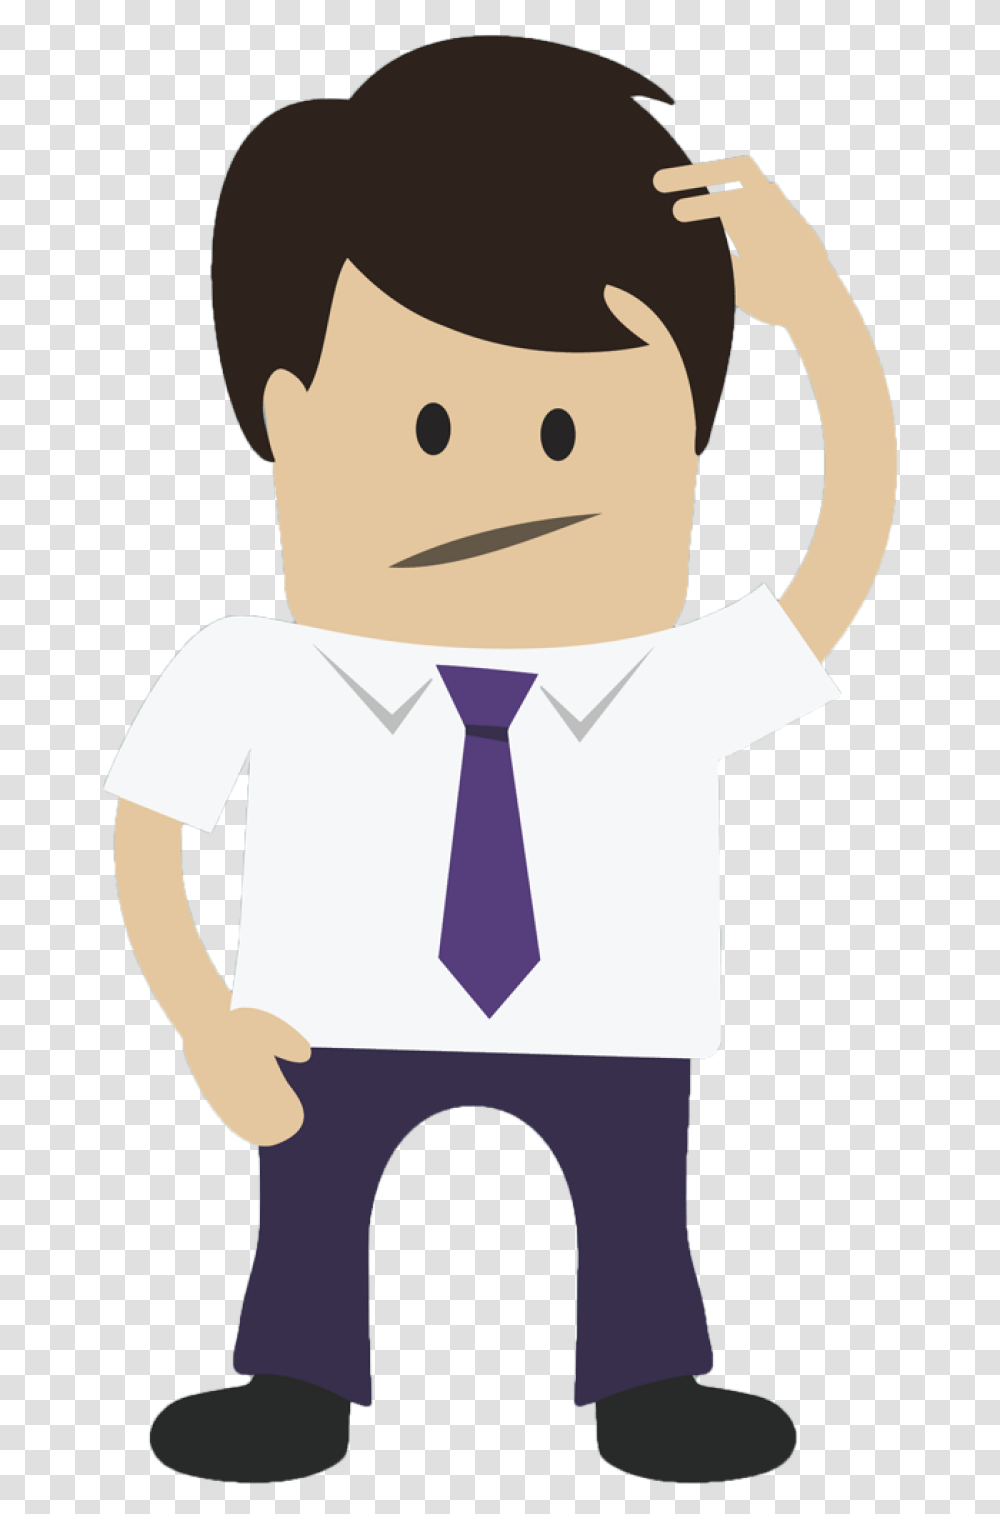 Faq Little Man Faq Little Man Confused Person Animation, Human, Tie, Accessories, Accessory Transparent Png